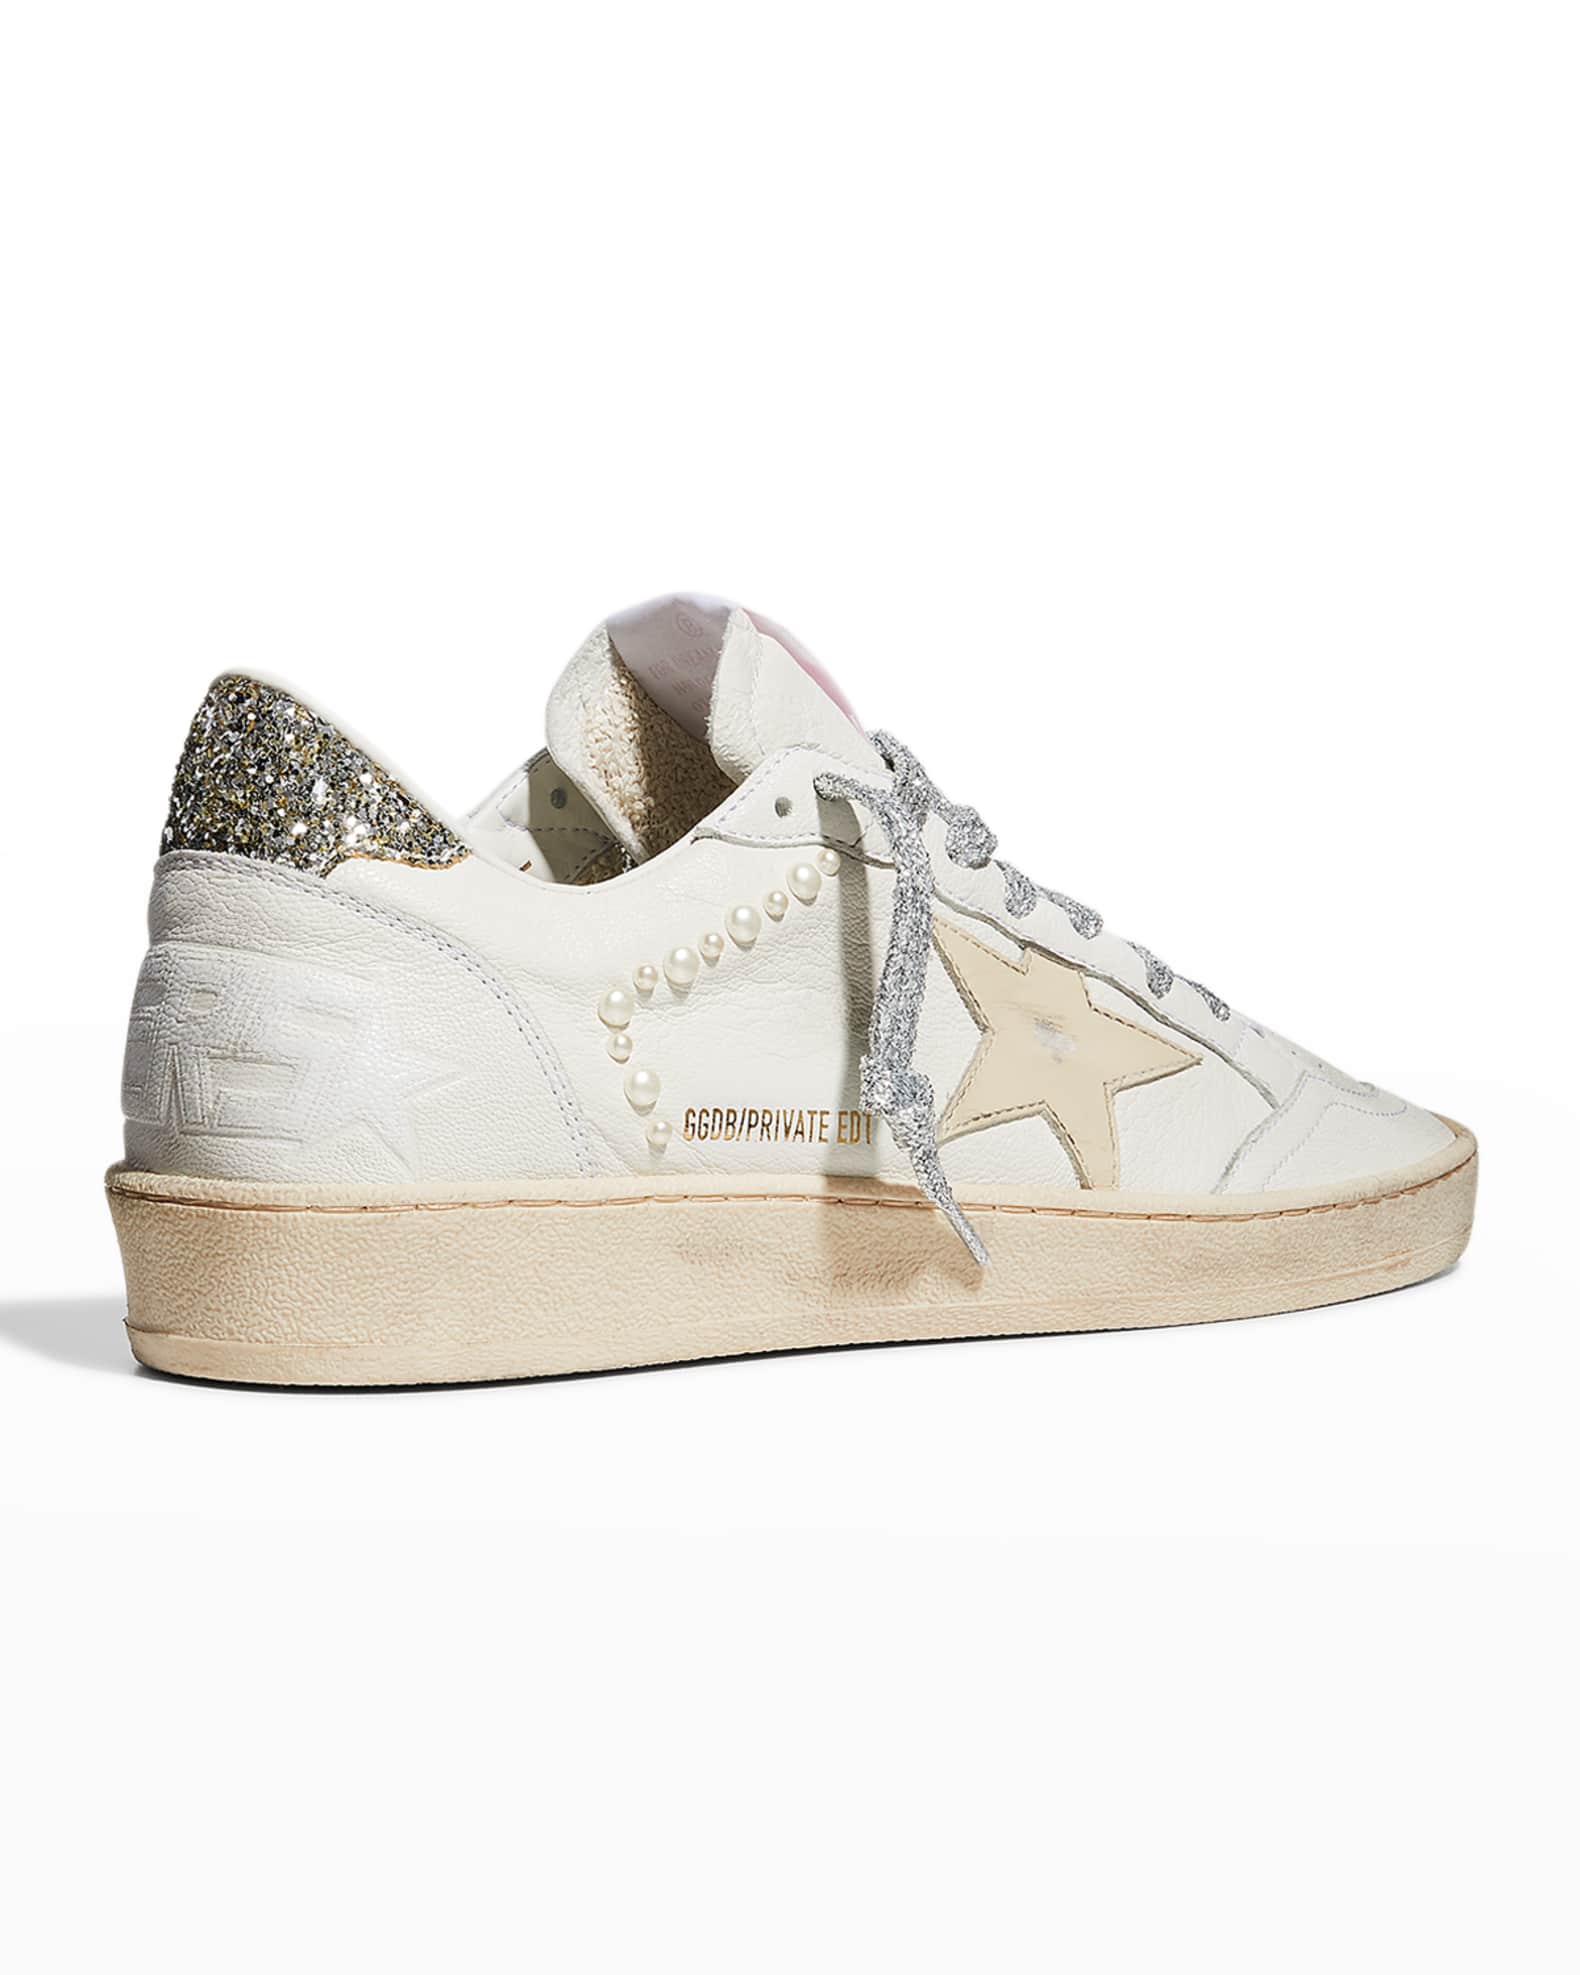 Golden Goose Ballstar Pearly Leather Glitter Sneakers | Neiman Marcus